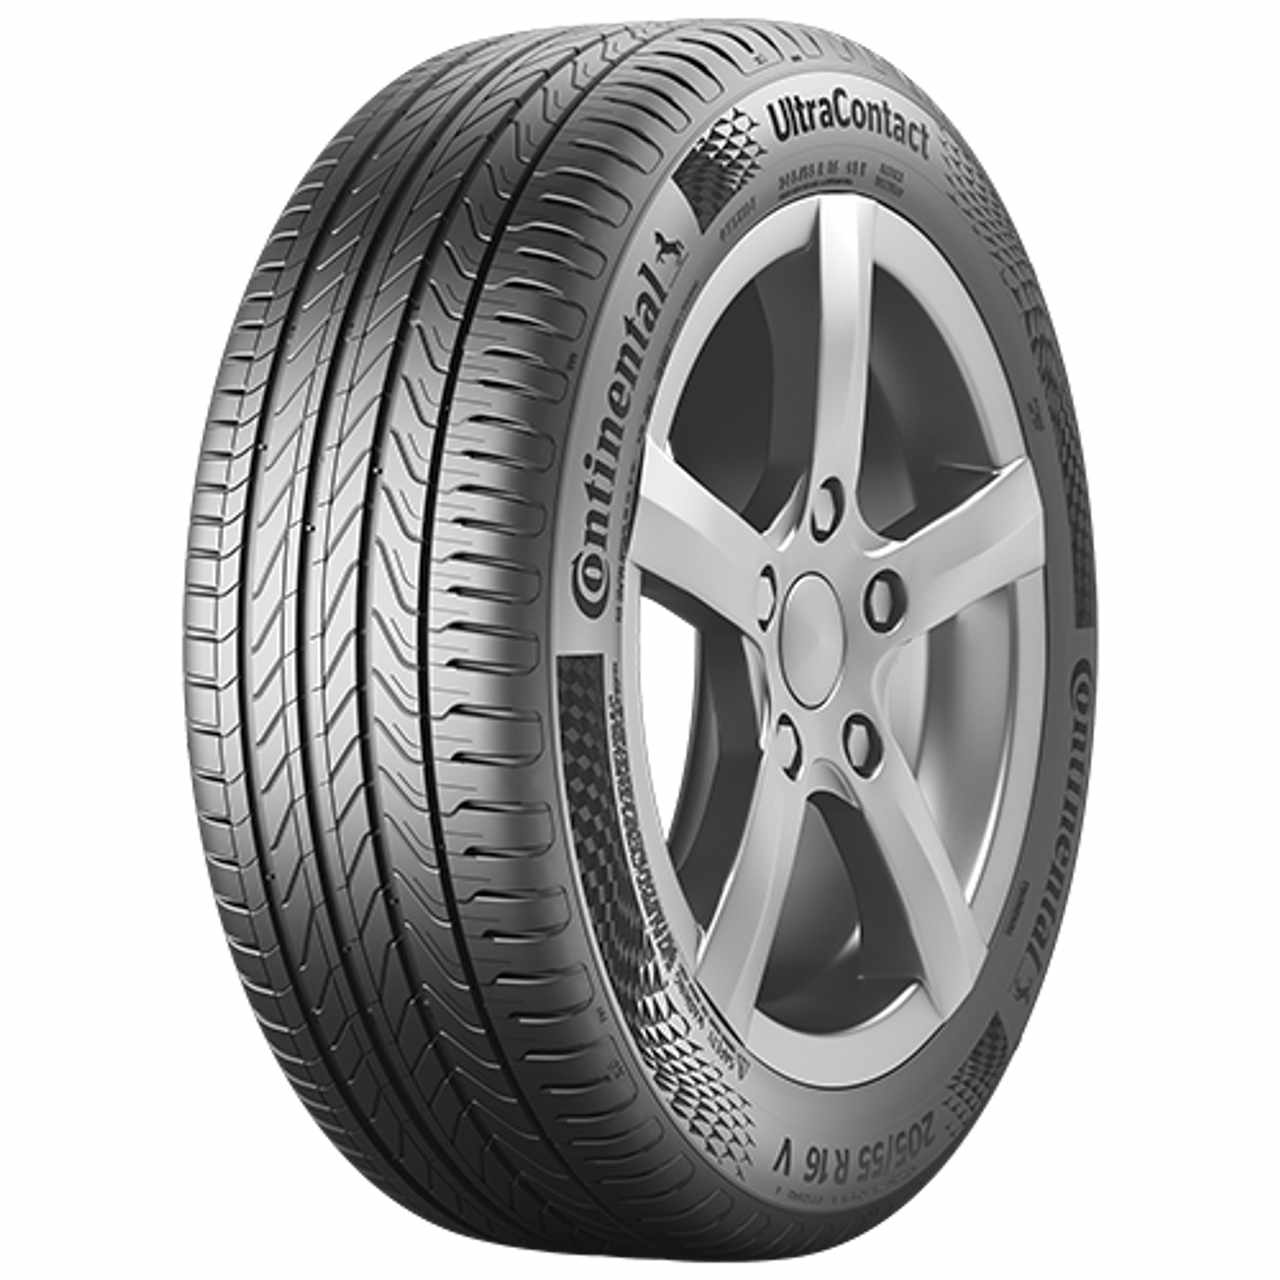 CONTINENTAL ULTRACONTACT (EVc) 205/65R15 94V BSW